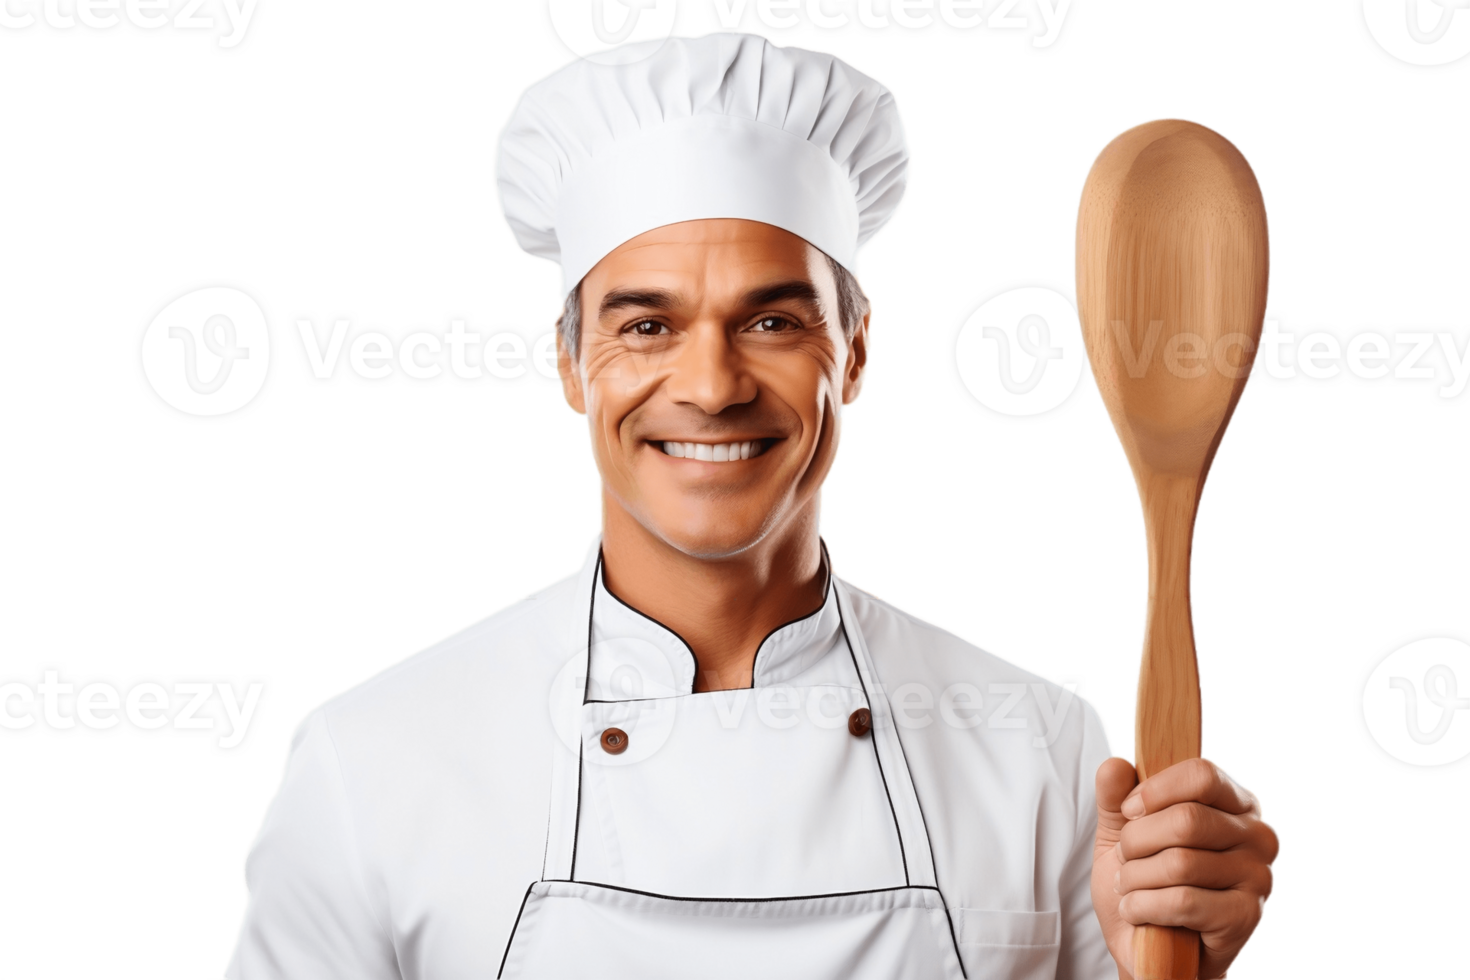 AI generated Male Chef with Chef's Hat Holding a Wooden Spoon on Transparent Background. AI png